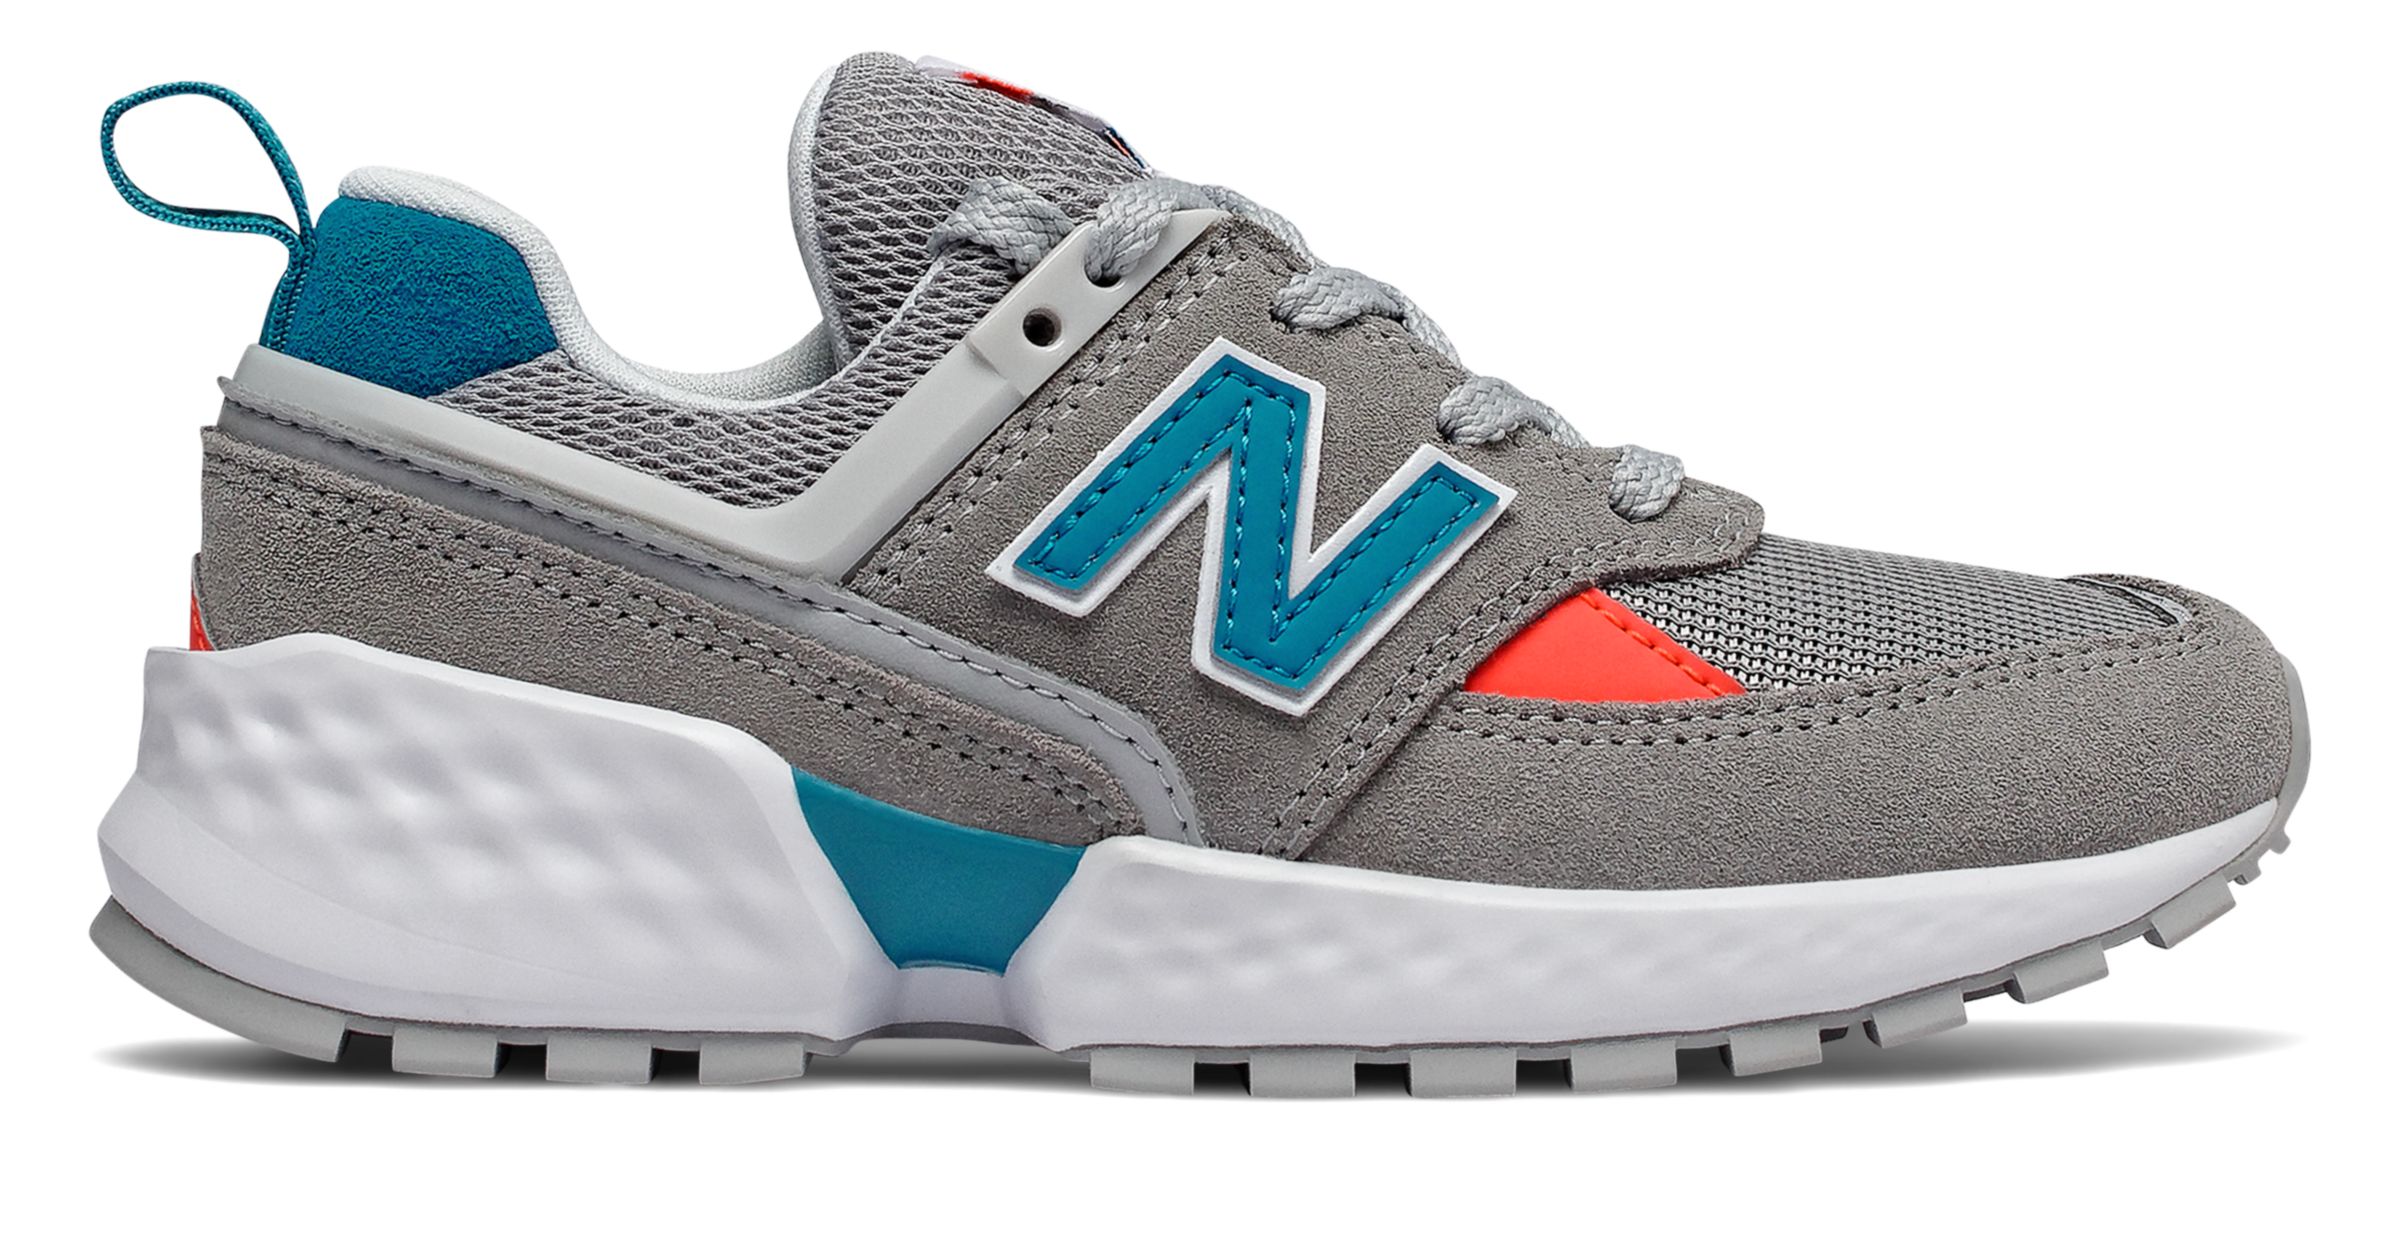 NB 574 Sport Collection - New Balance